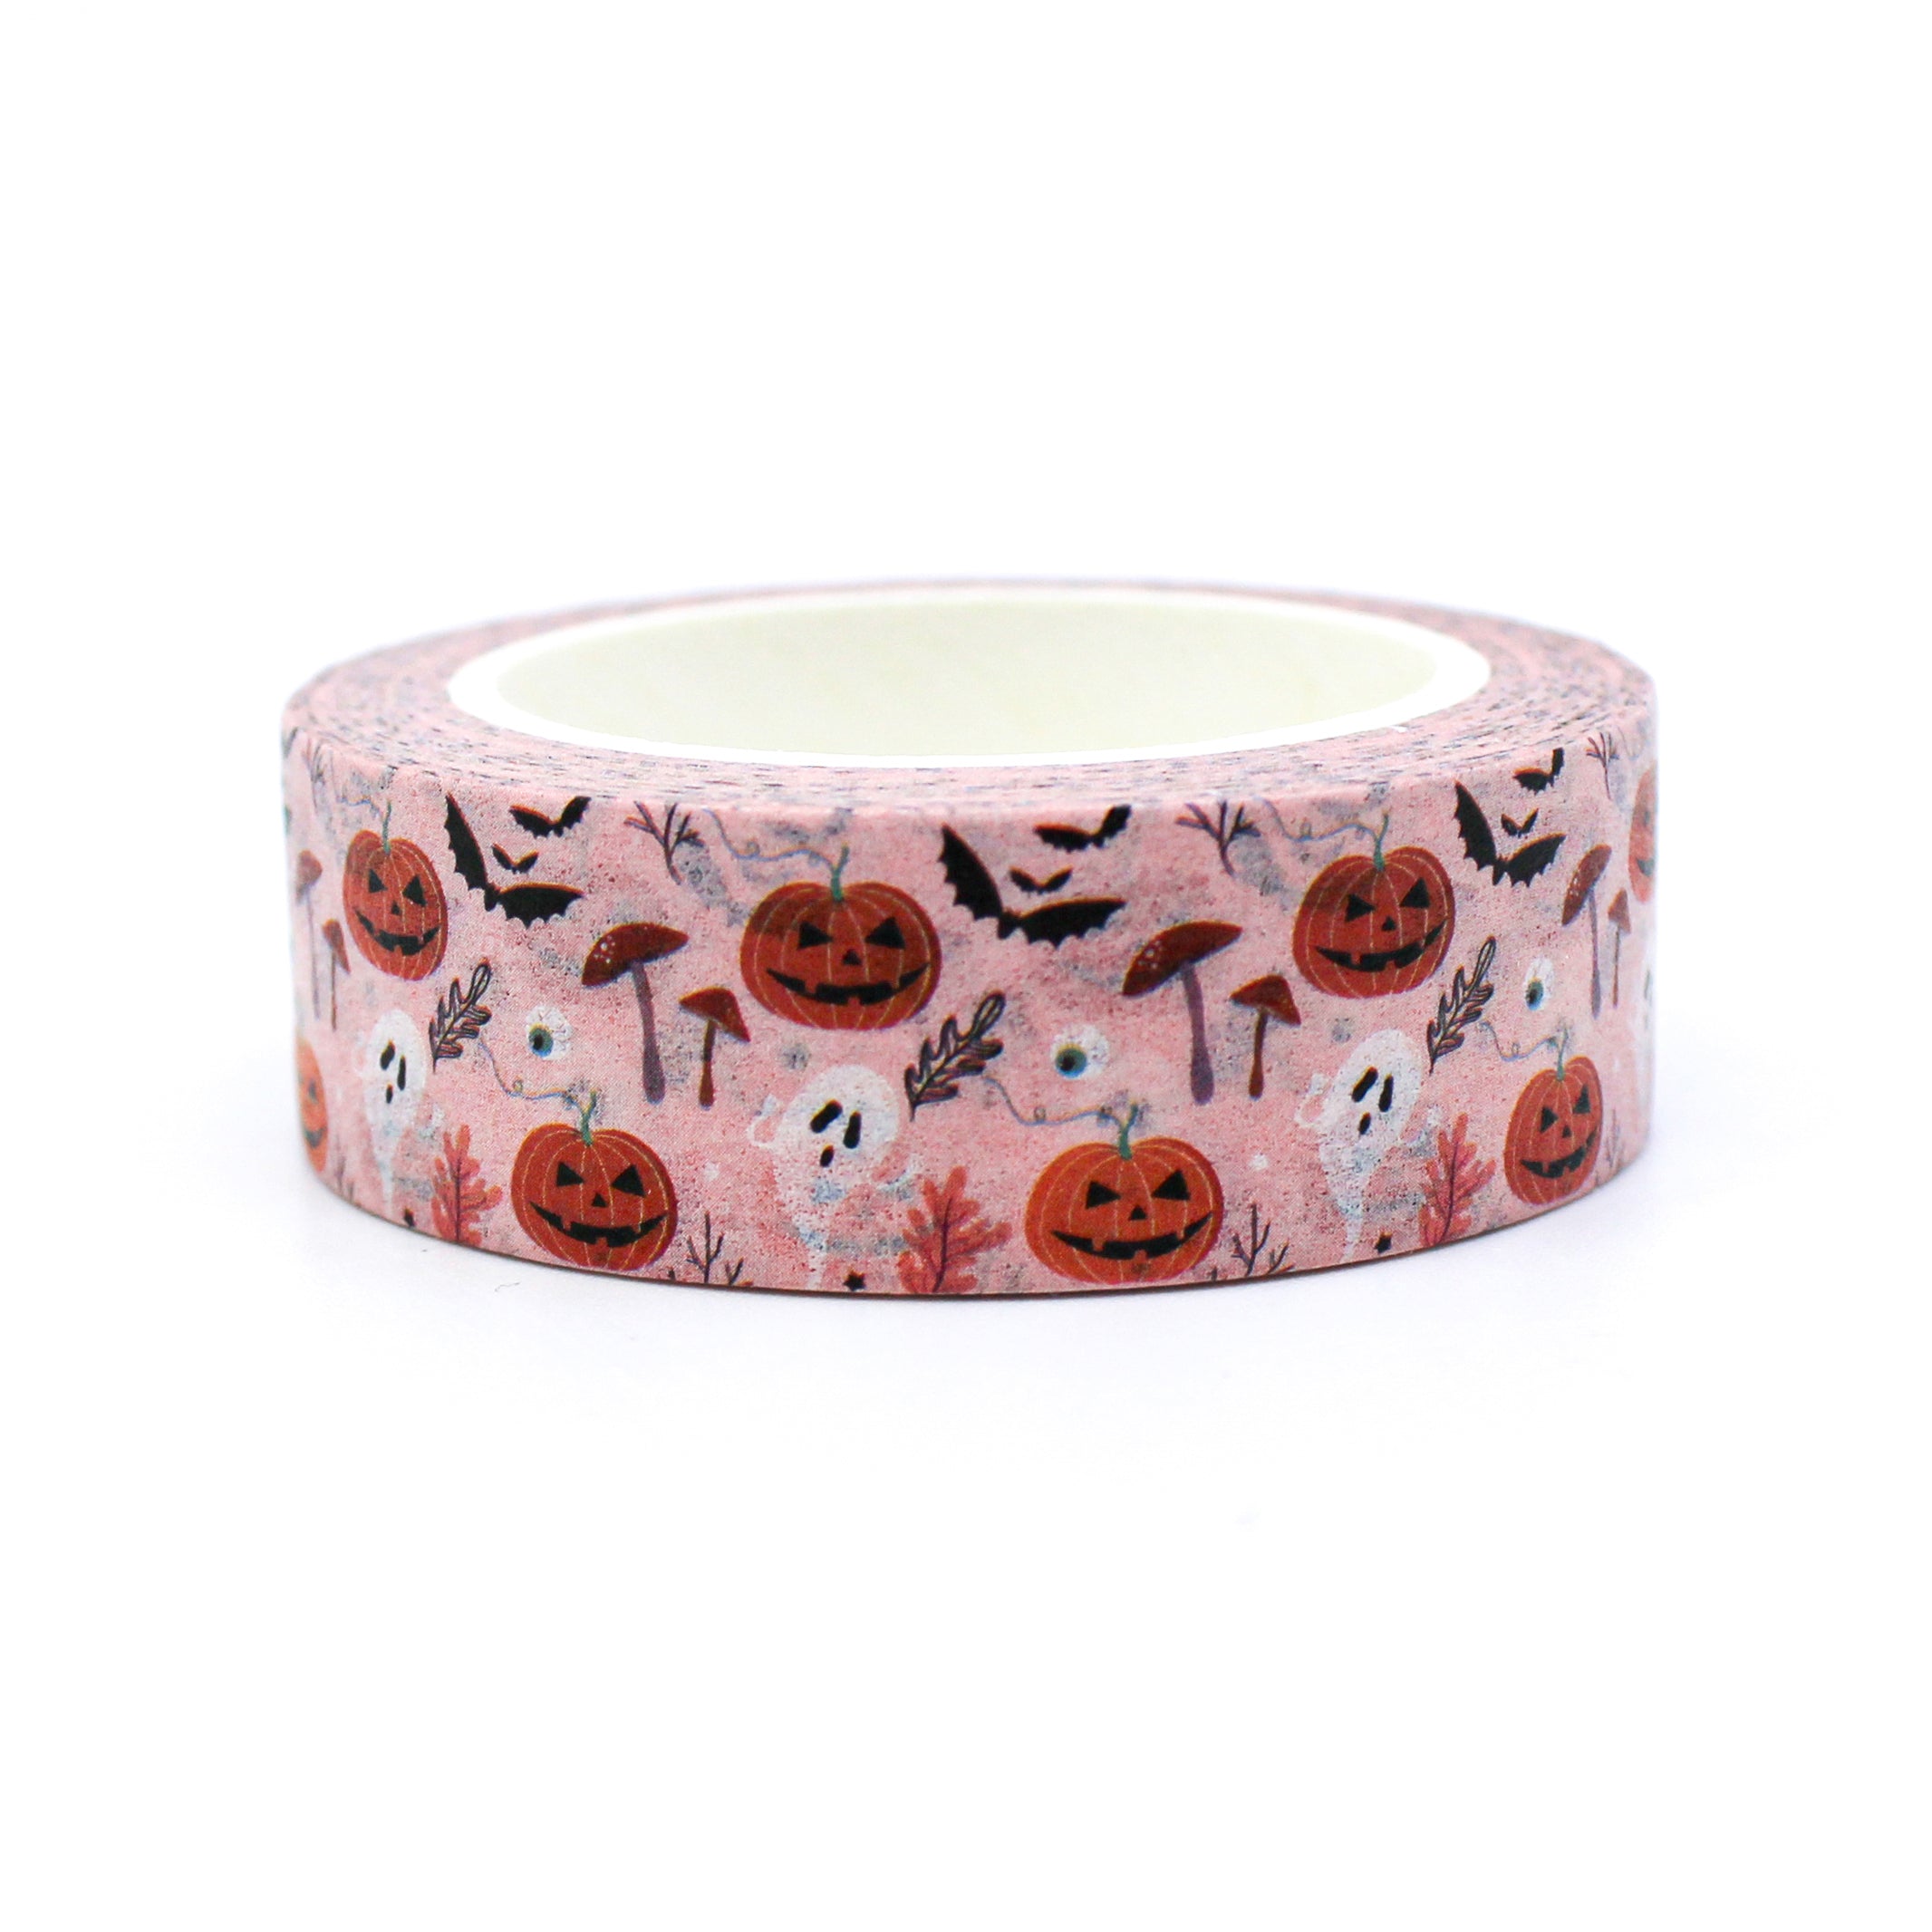 This is a view of spooky pumpkin ghost and mushrooms pattern washi tape from BBB Supplies Craft Shop